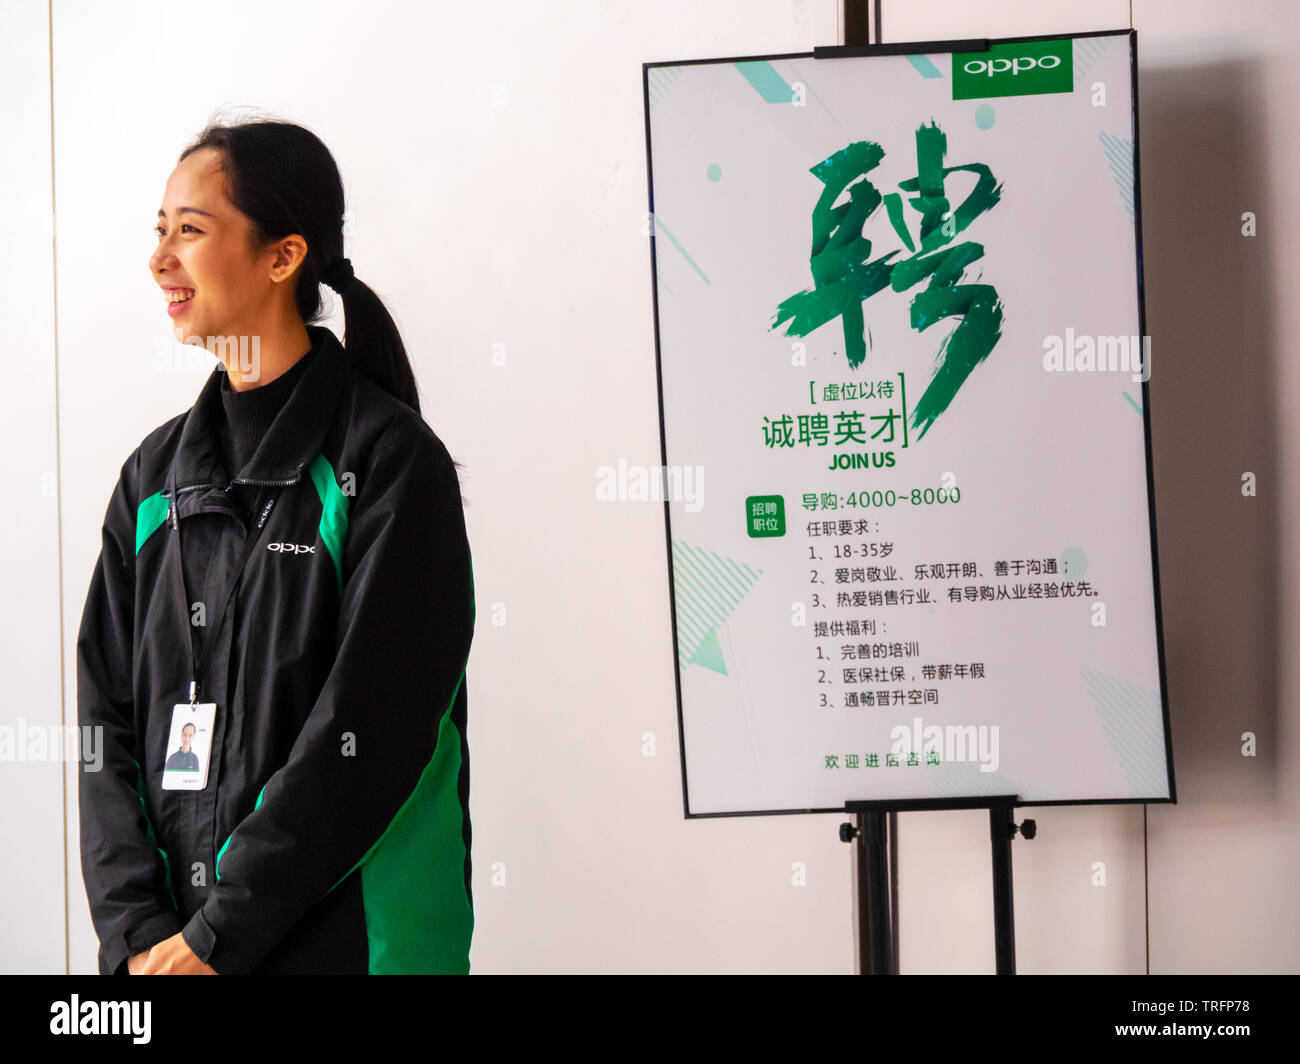 TIANHE, GUANGZHOU CITY, CHINA - 7 MAR 2019 - Smiling young Asian Chinese female Oppo employee stands next to an staff recruitment poster Stock Photo